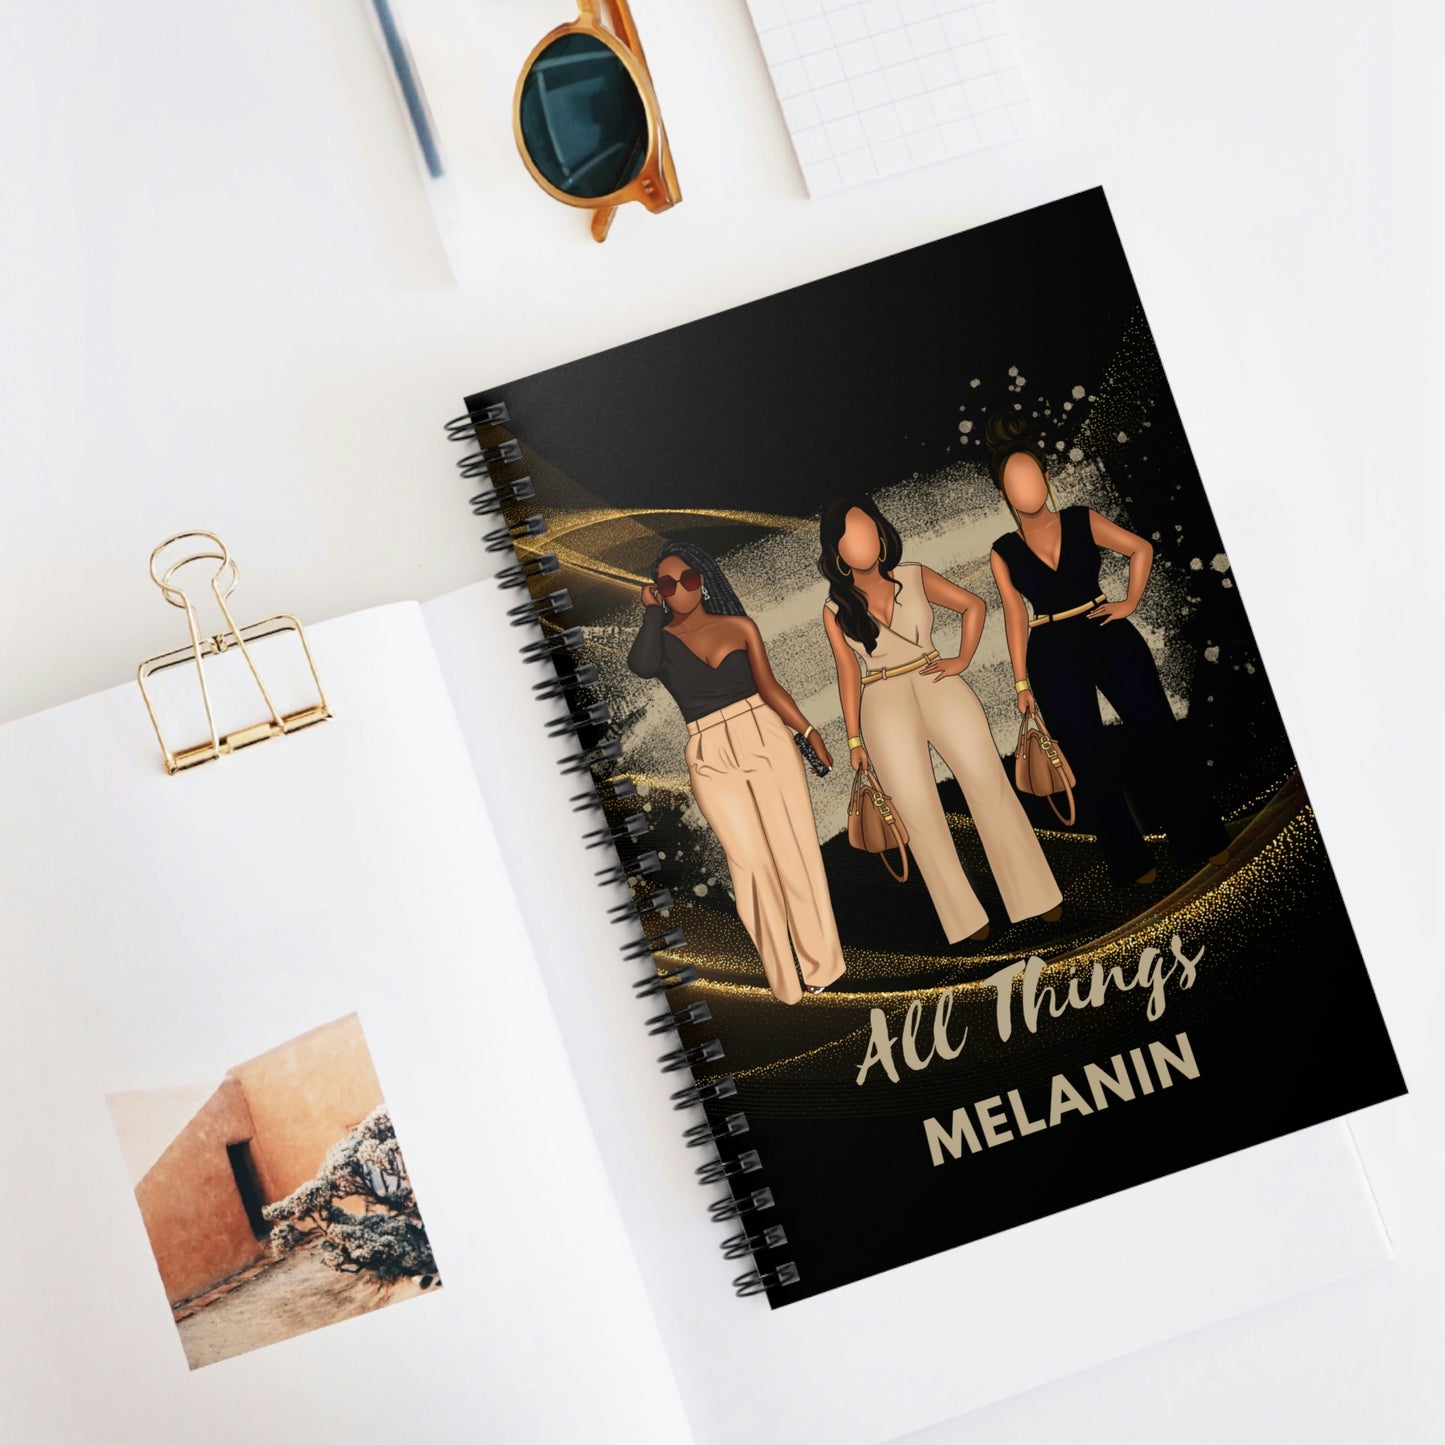 All Things Melanin (ATM Collection) Journal - Ruled Line